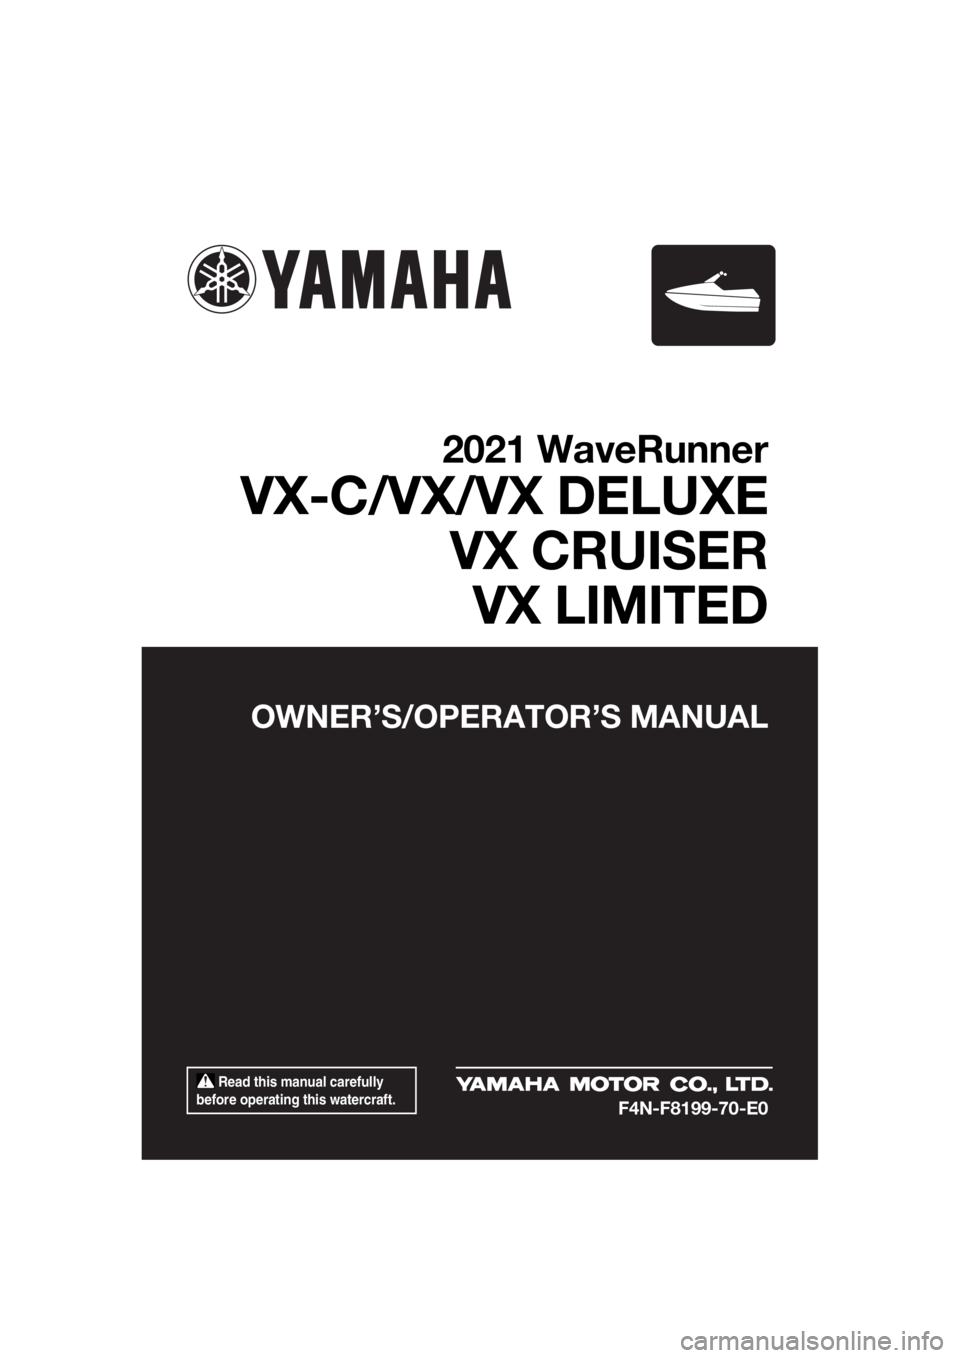 YAMAHA VX LIMITED 2021  Owners Manual  Read this manual carefully 
before operating this watercraft.
OWNER’S/OPERAT OR’S MANUAL
2021 WaveRunner
VX-C/VX/VX DELUXE
VX CRUISERVX LIMITED
F4N-F8199-70-E0
UF4N70E0.book  Page 1  Tuesday, Oct